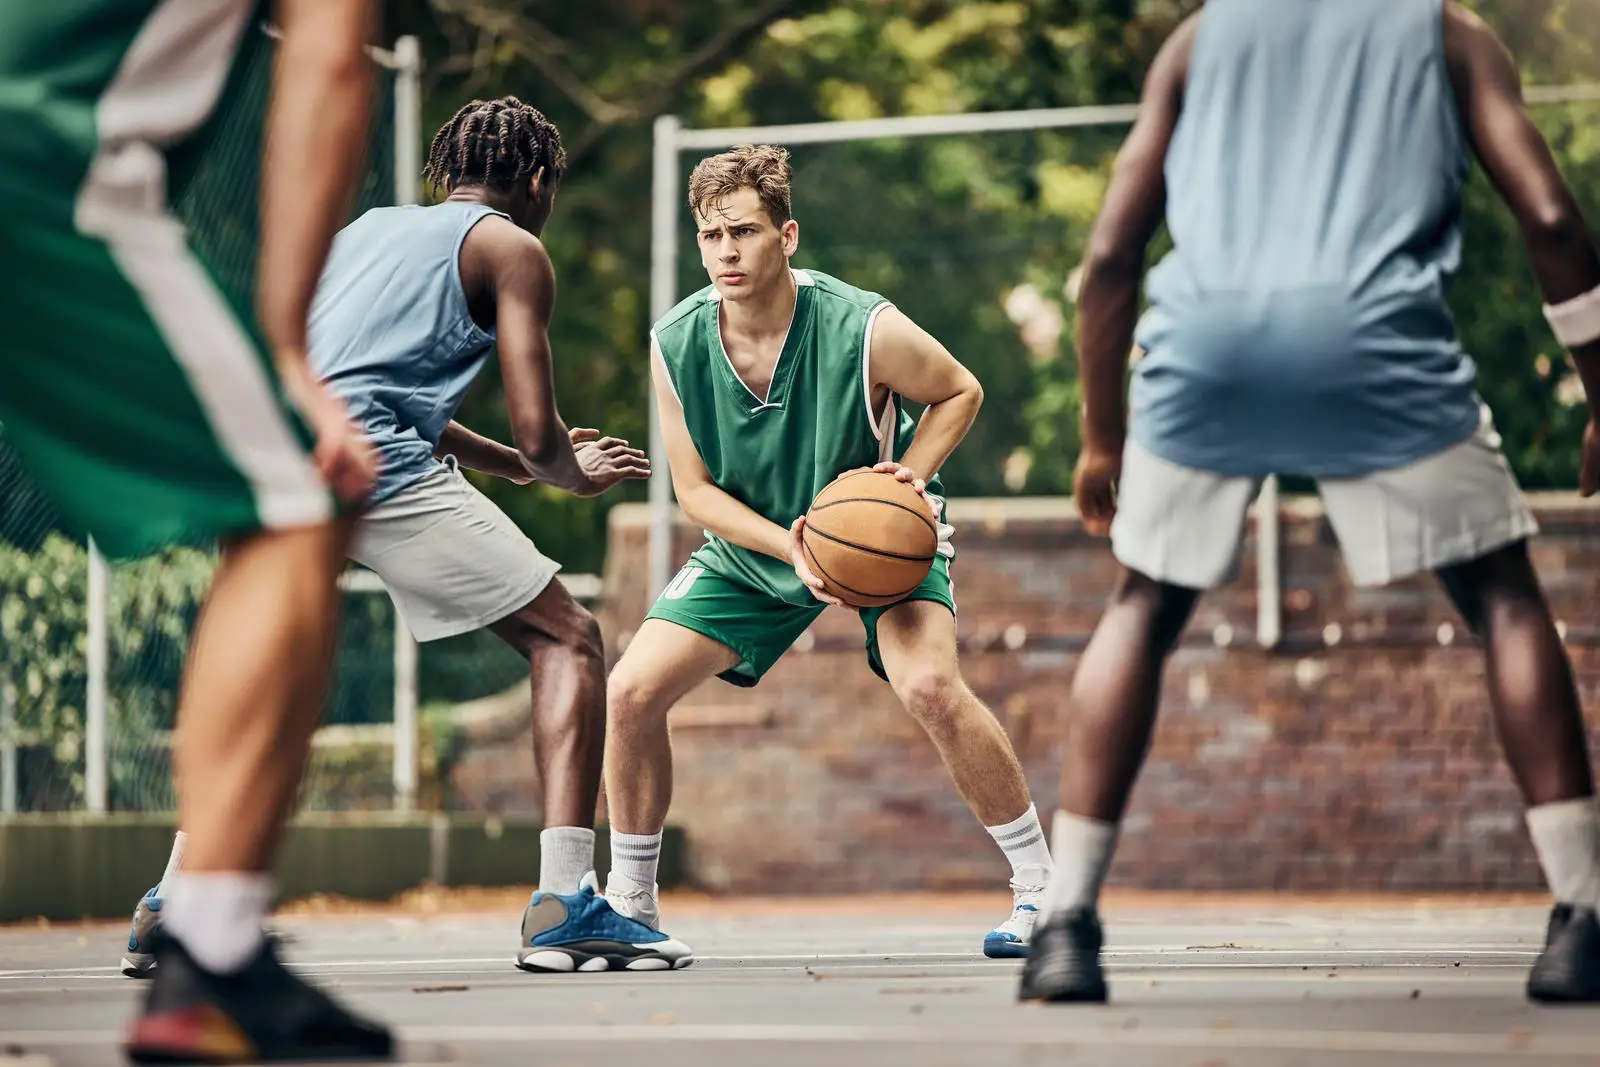 Basketball, team sport and competition for male athletes and players in training or professional match on an outdoor fitness court. Diversity, competitive and skill of men playing a ball game in USA